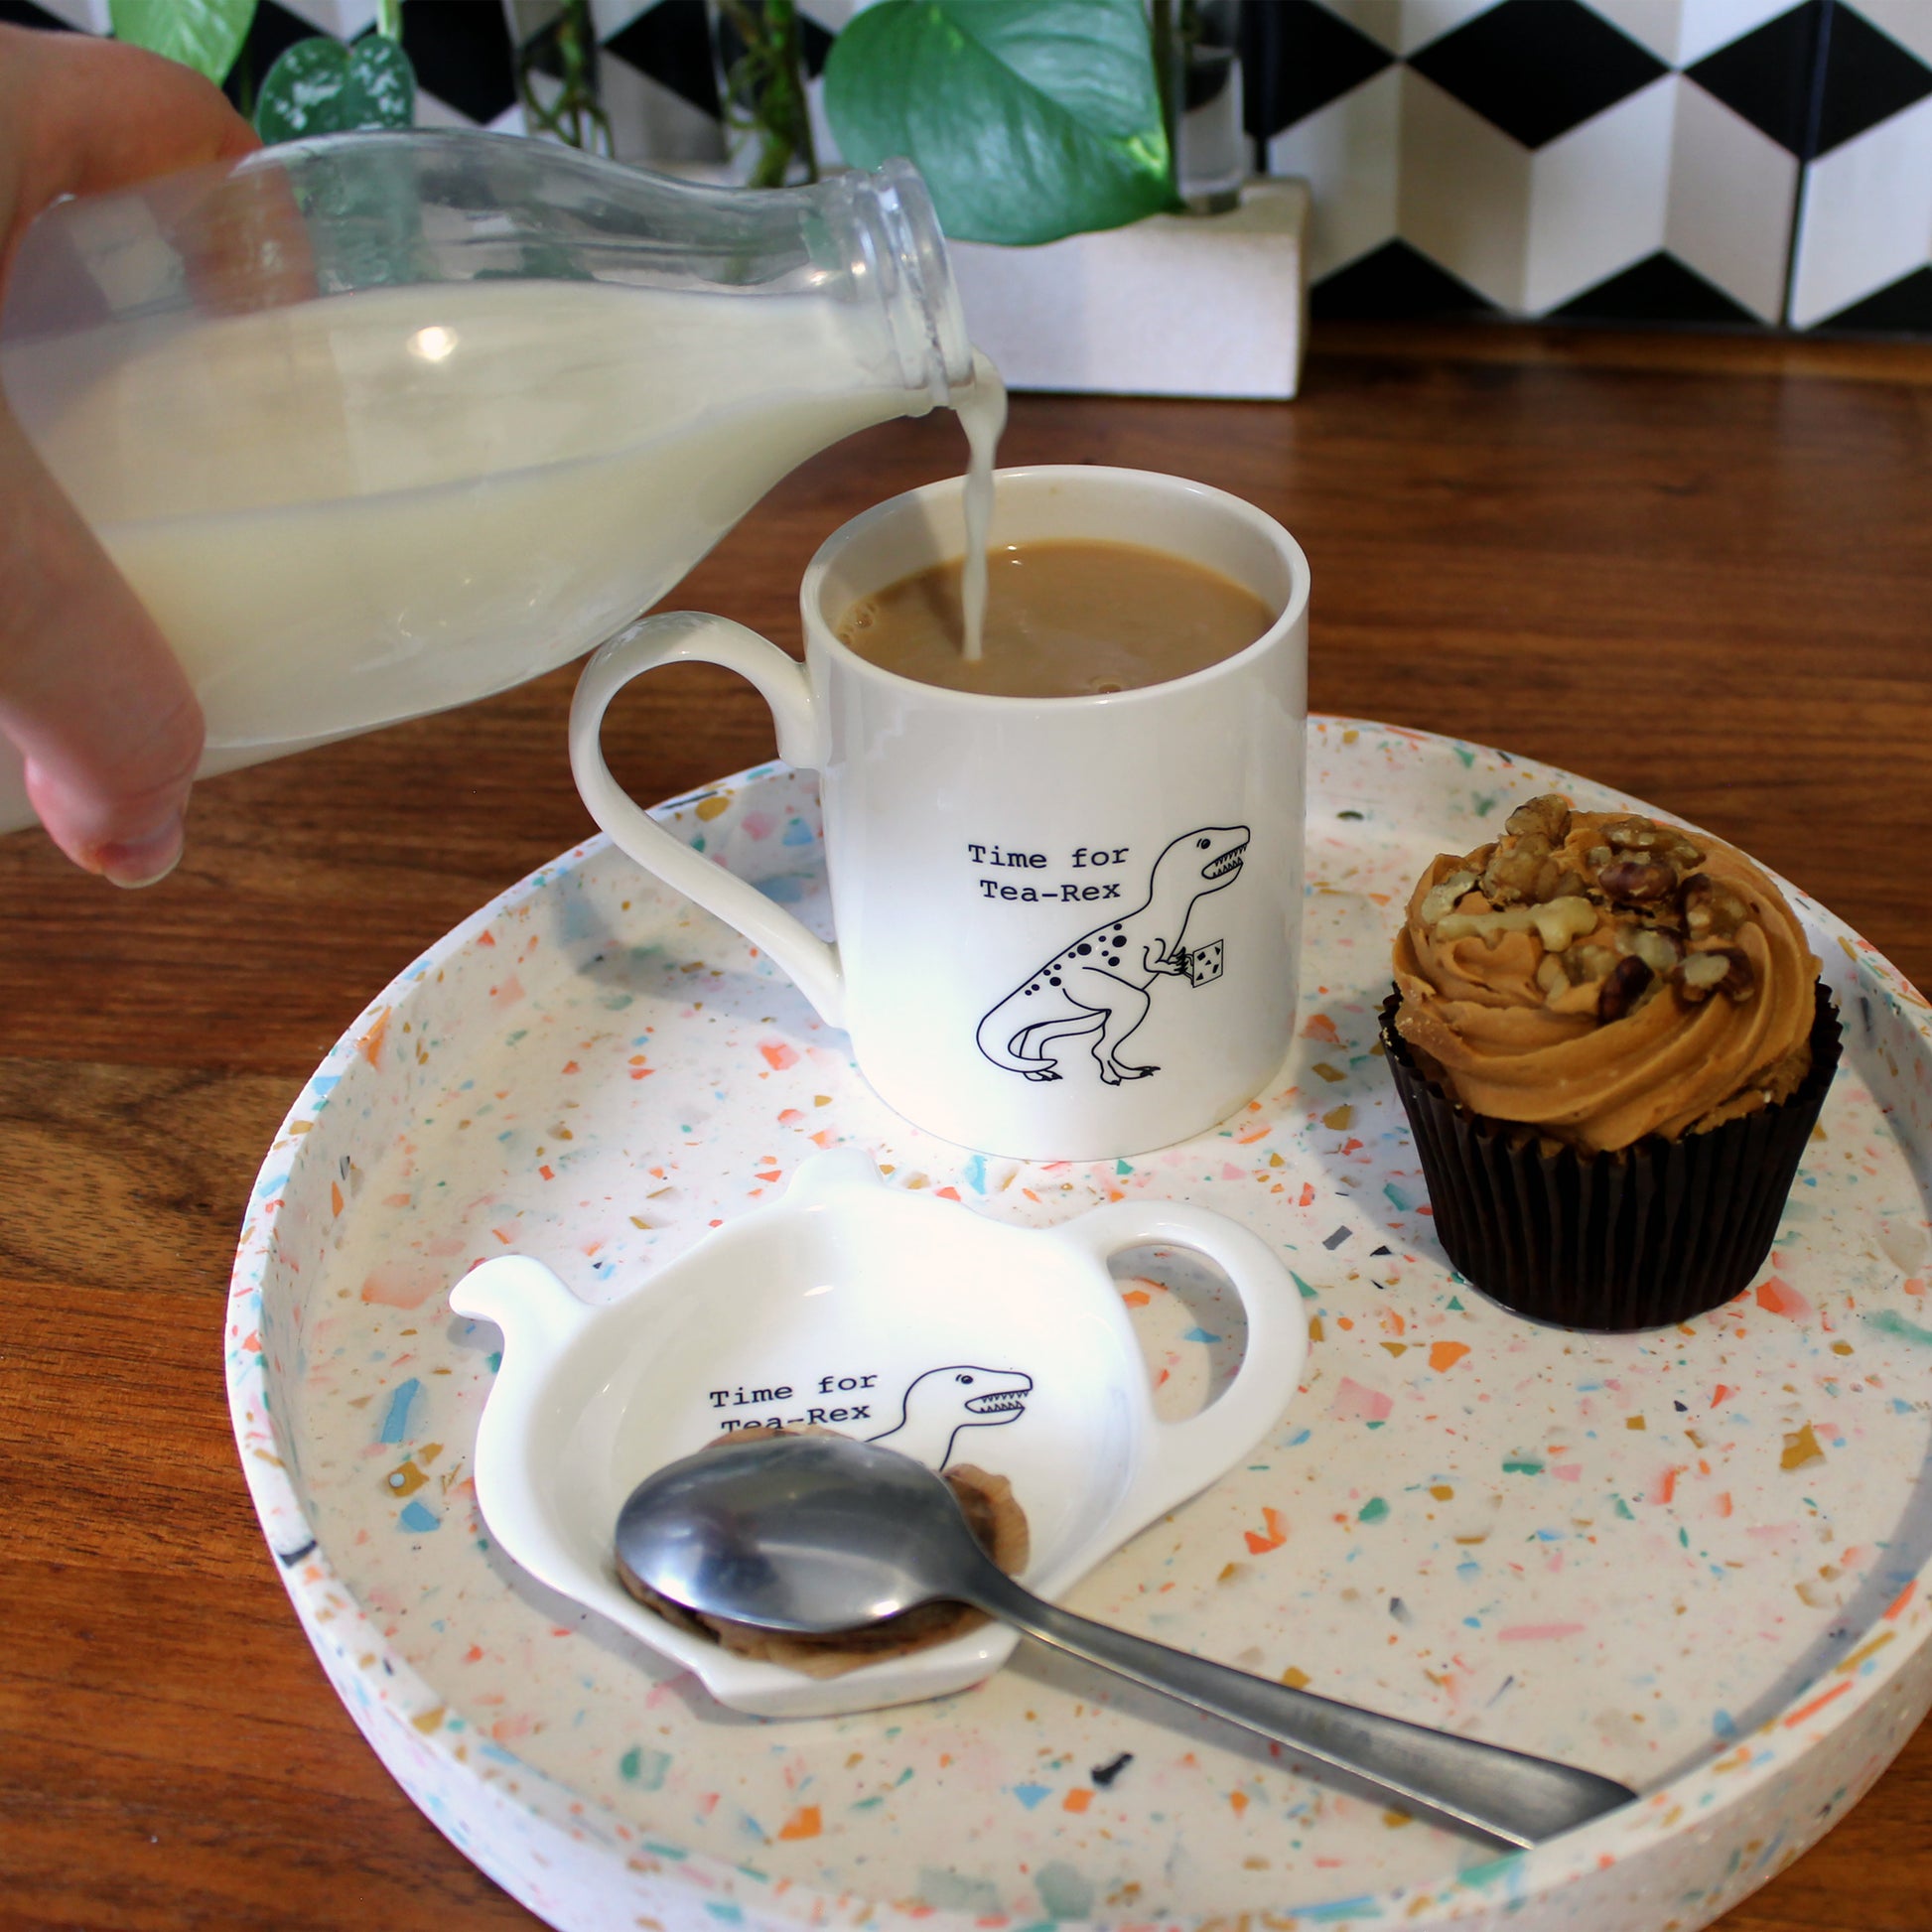 Time for Tea-Rex Mug and Teabag Tidy set on a terrazzo tray with a cupcake. A hand is pouring milk into the mug that is full of tea